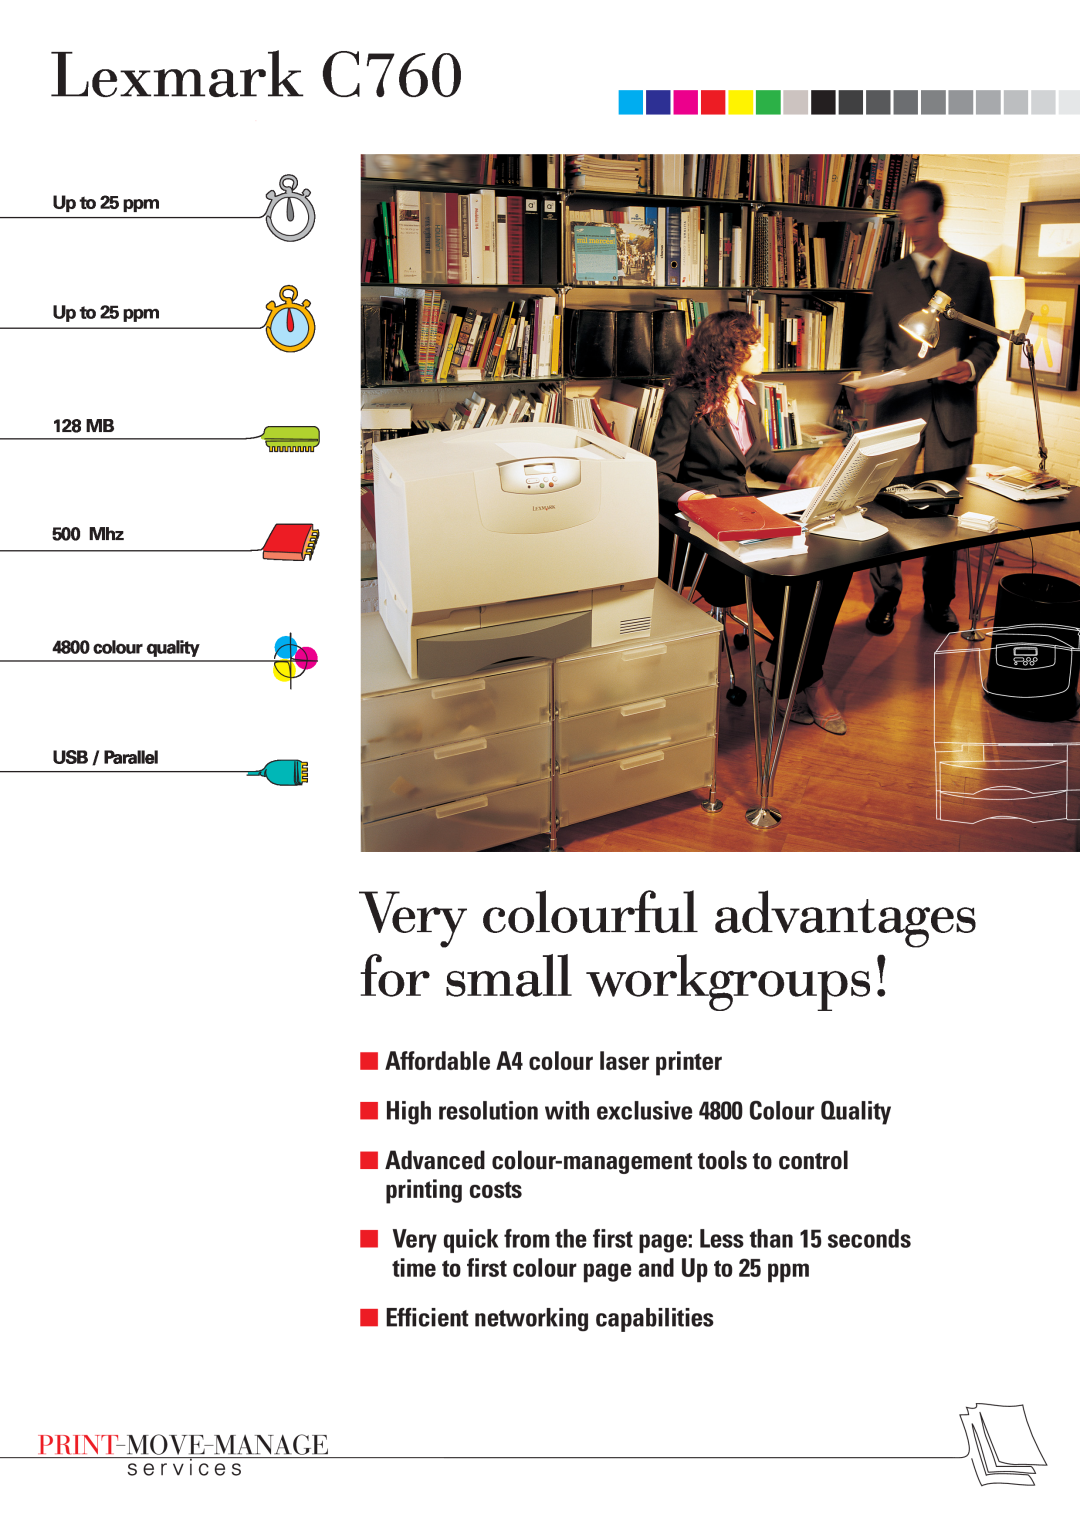 Lexmark manual Lexmark C760, Very colourful advantages for small workgroups, Affordable A4 colour laser printer 